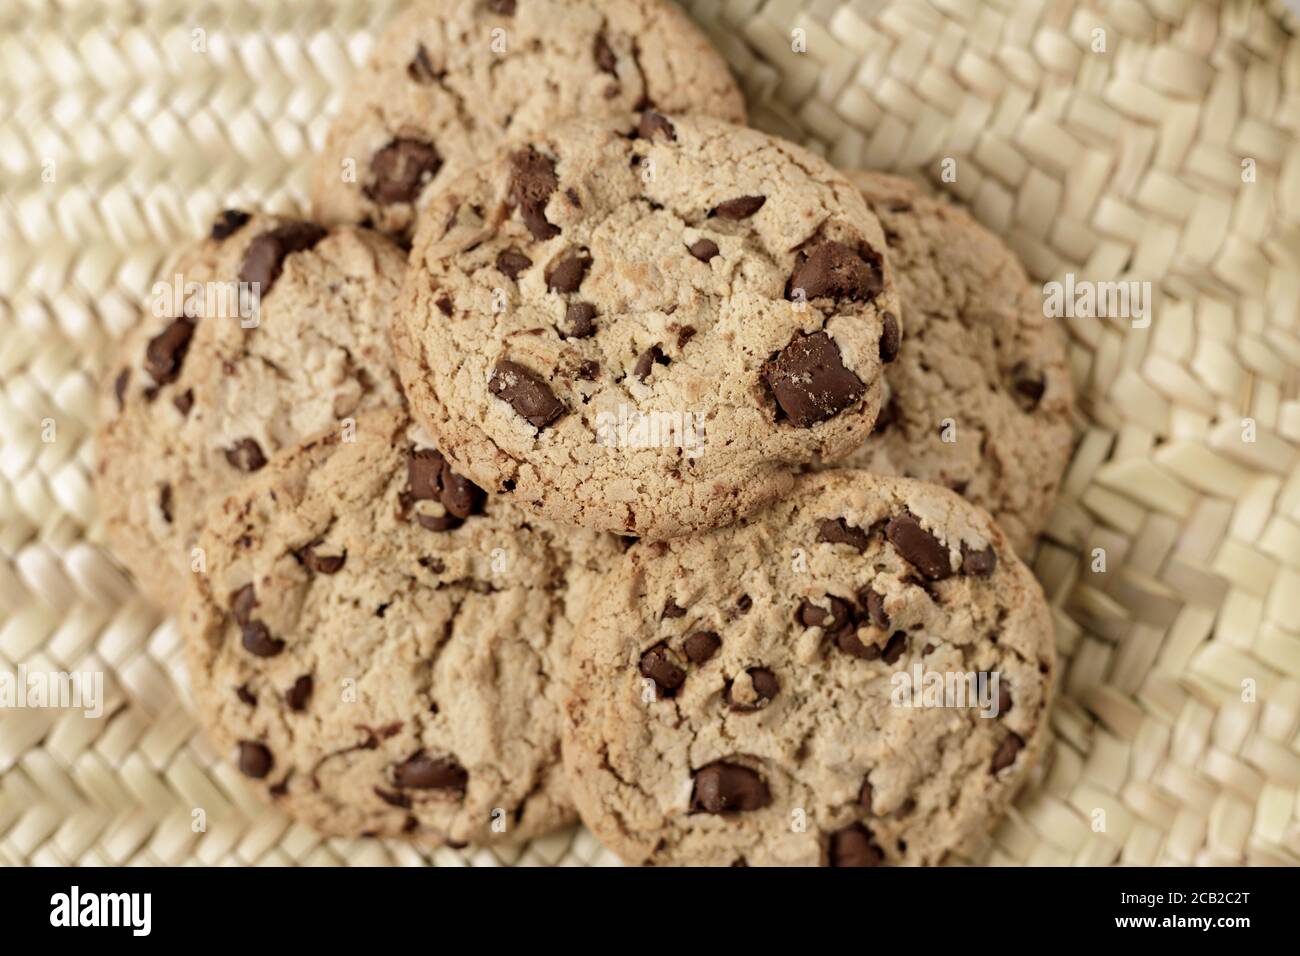 Home made chocolate cookies pile on a natural wicker surface Stock Photo